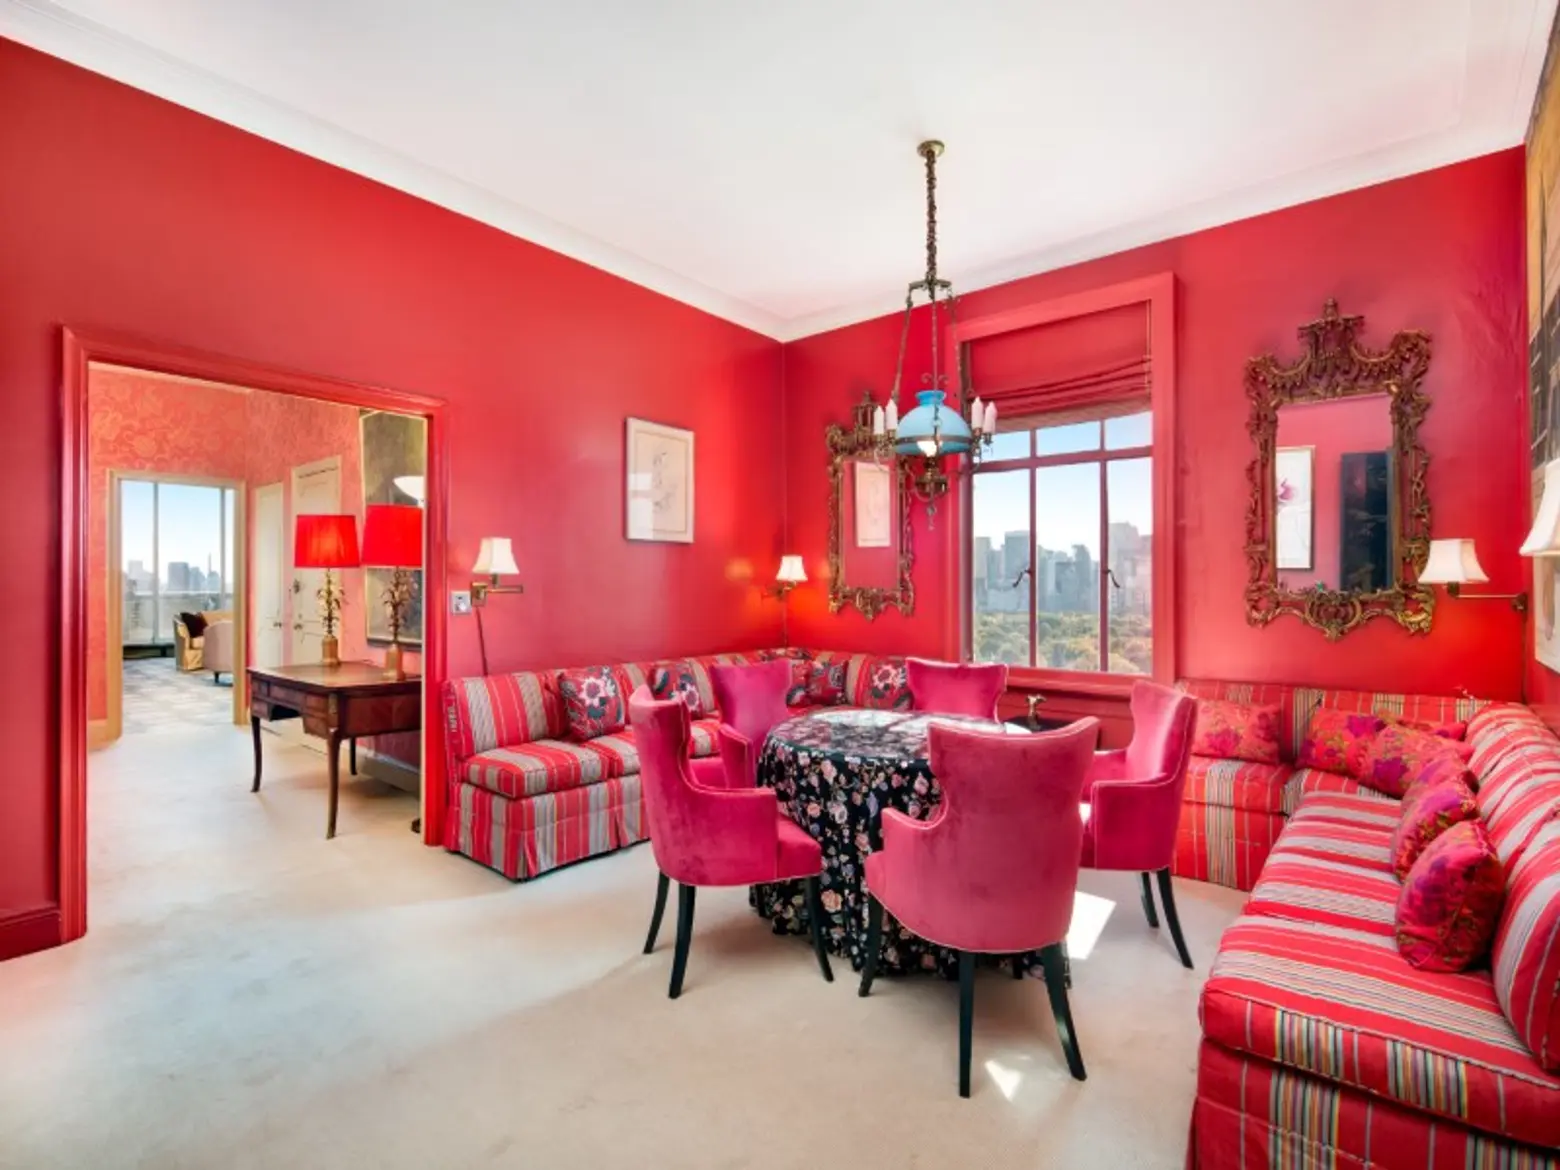 Cosmopolitan Editor Helen Gurley Brown’s Pink Penthouse Lists for $20M